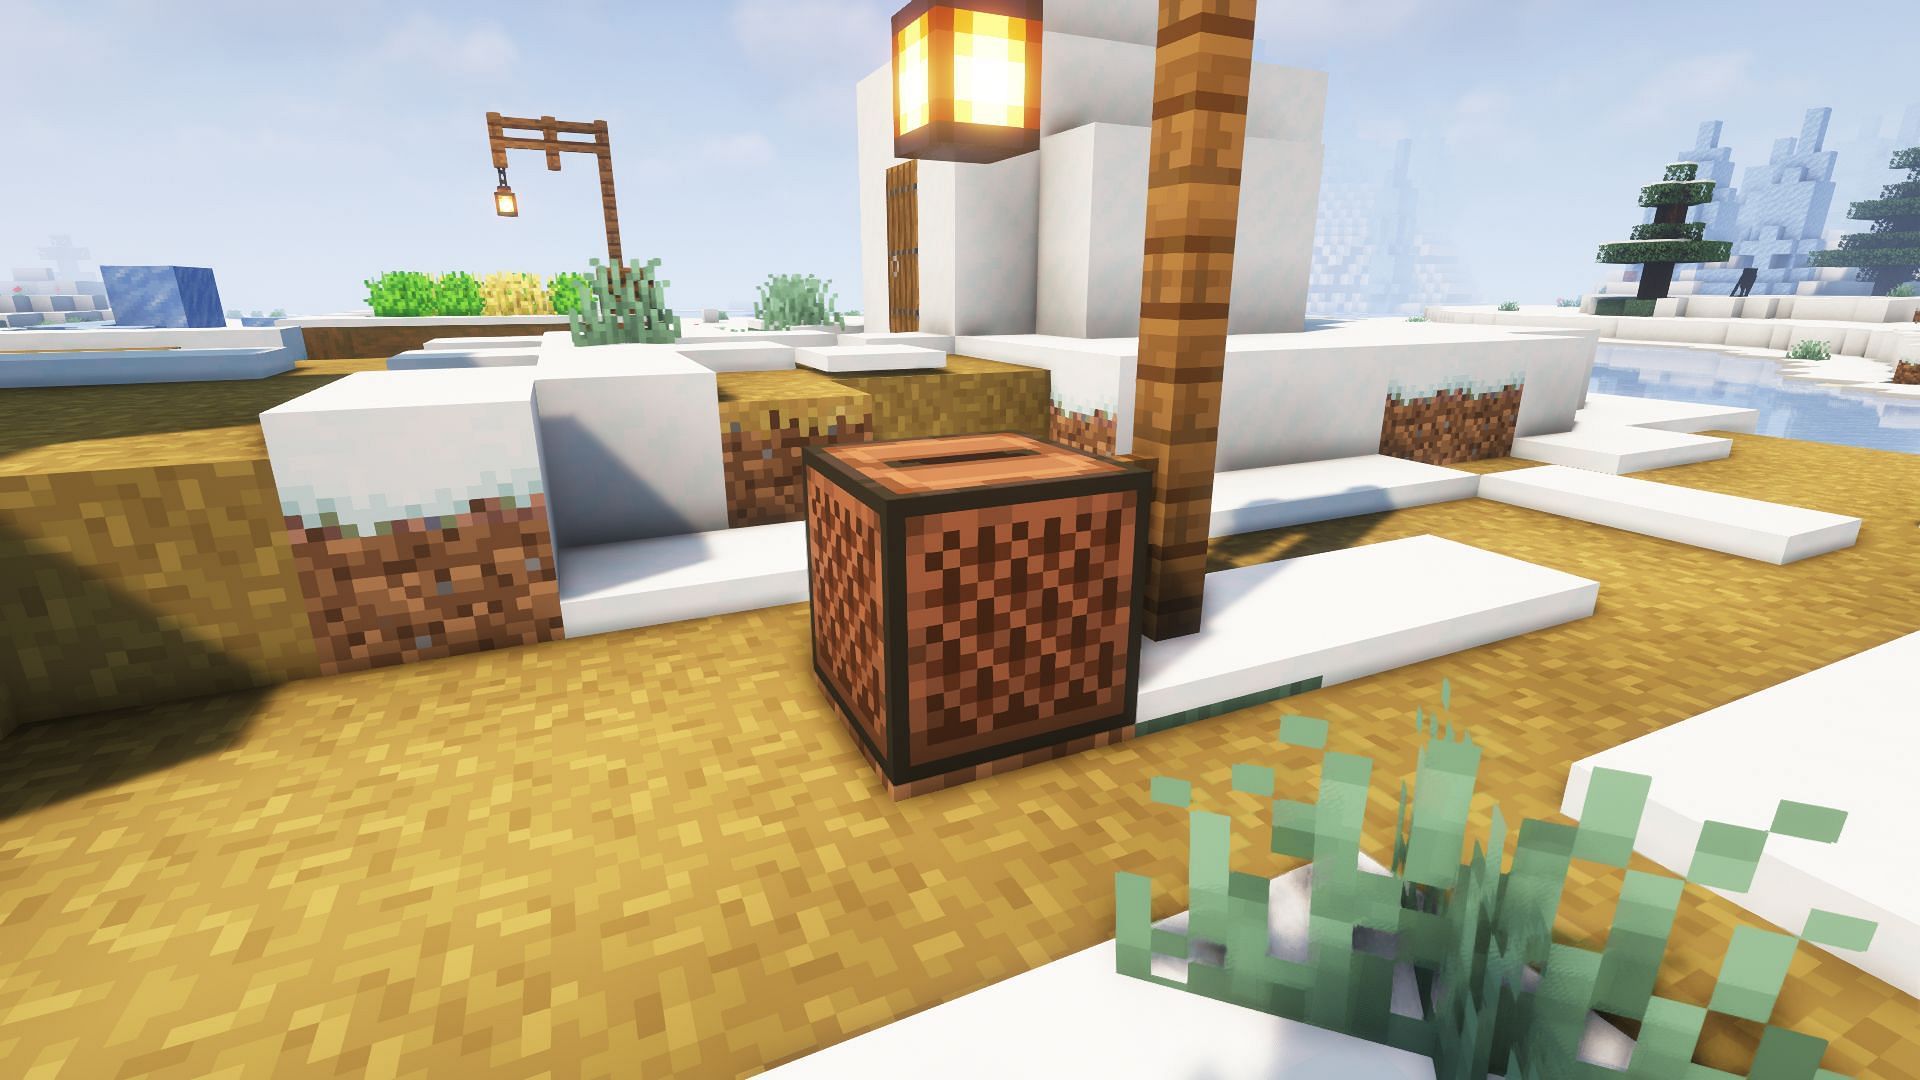 A jukebox in the game (Image via Minecraft)